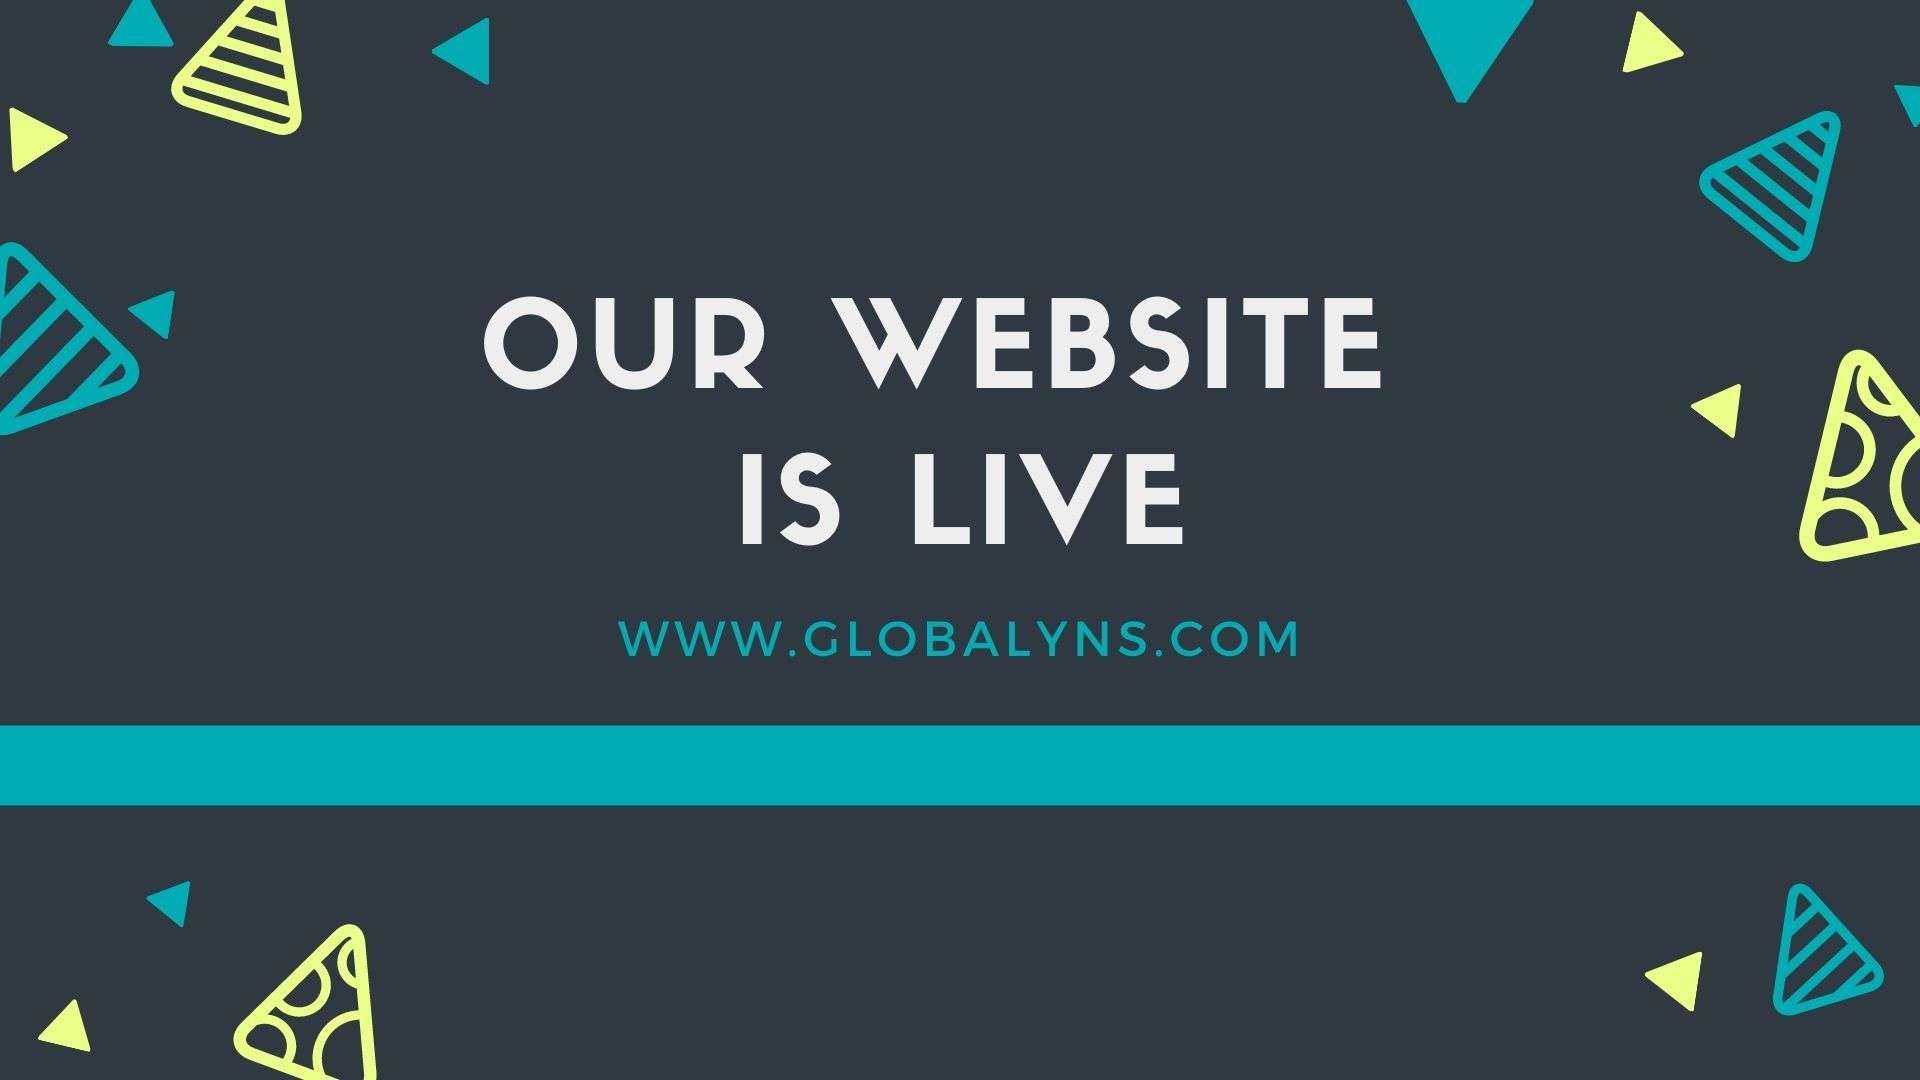 Our new website is live!